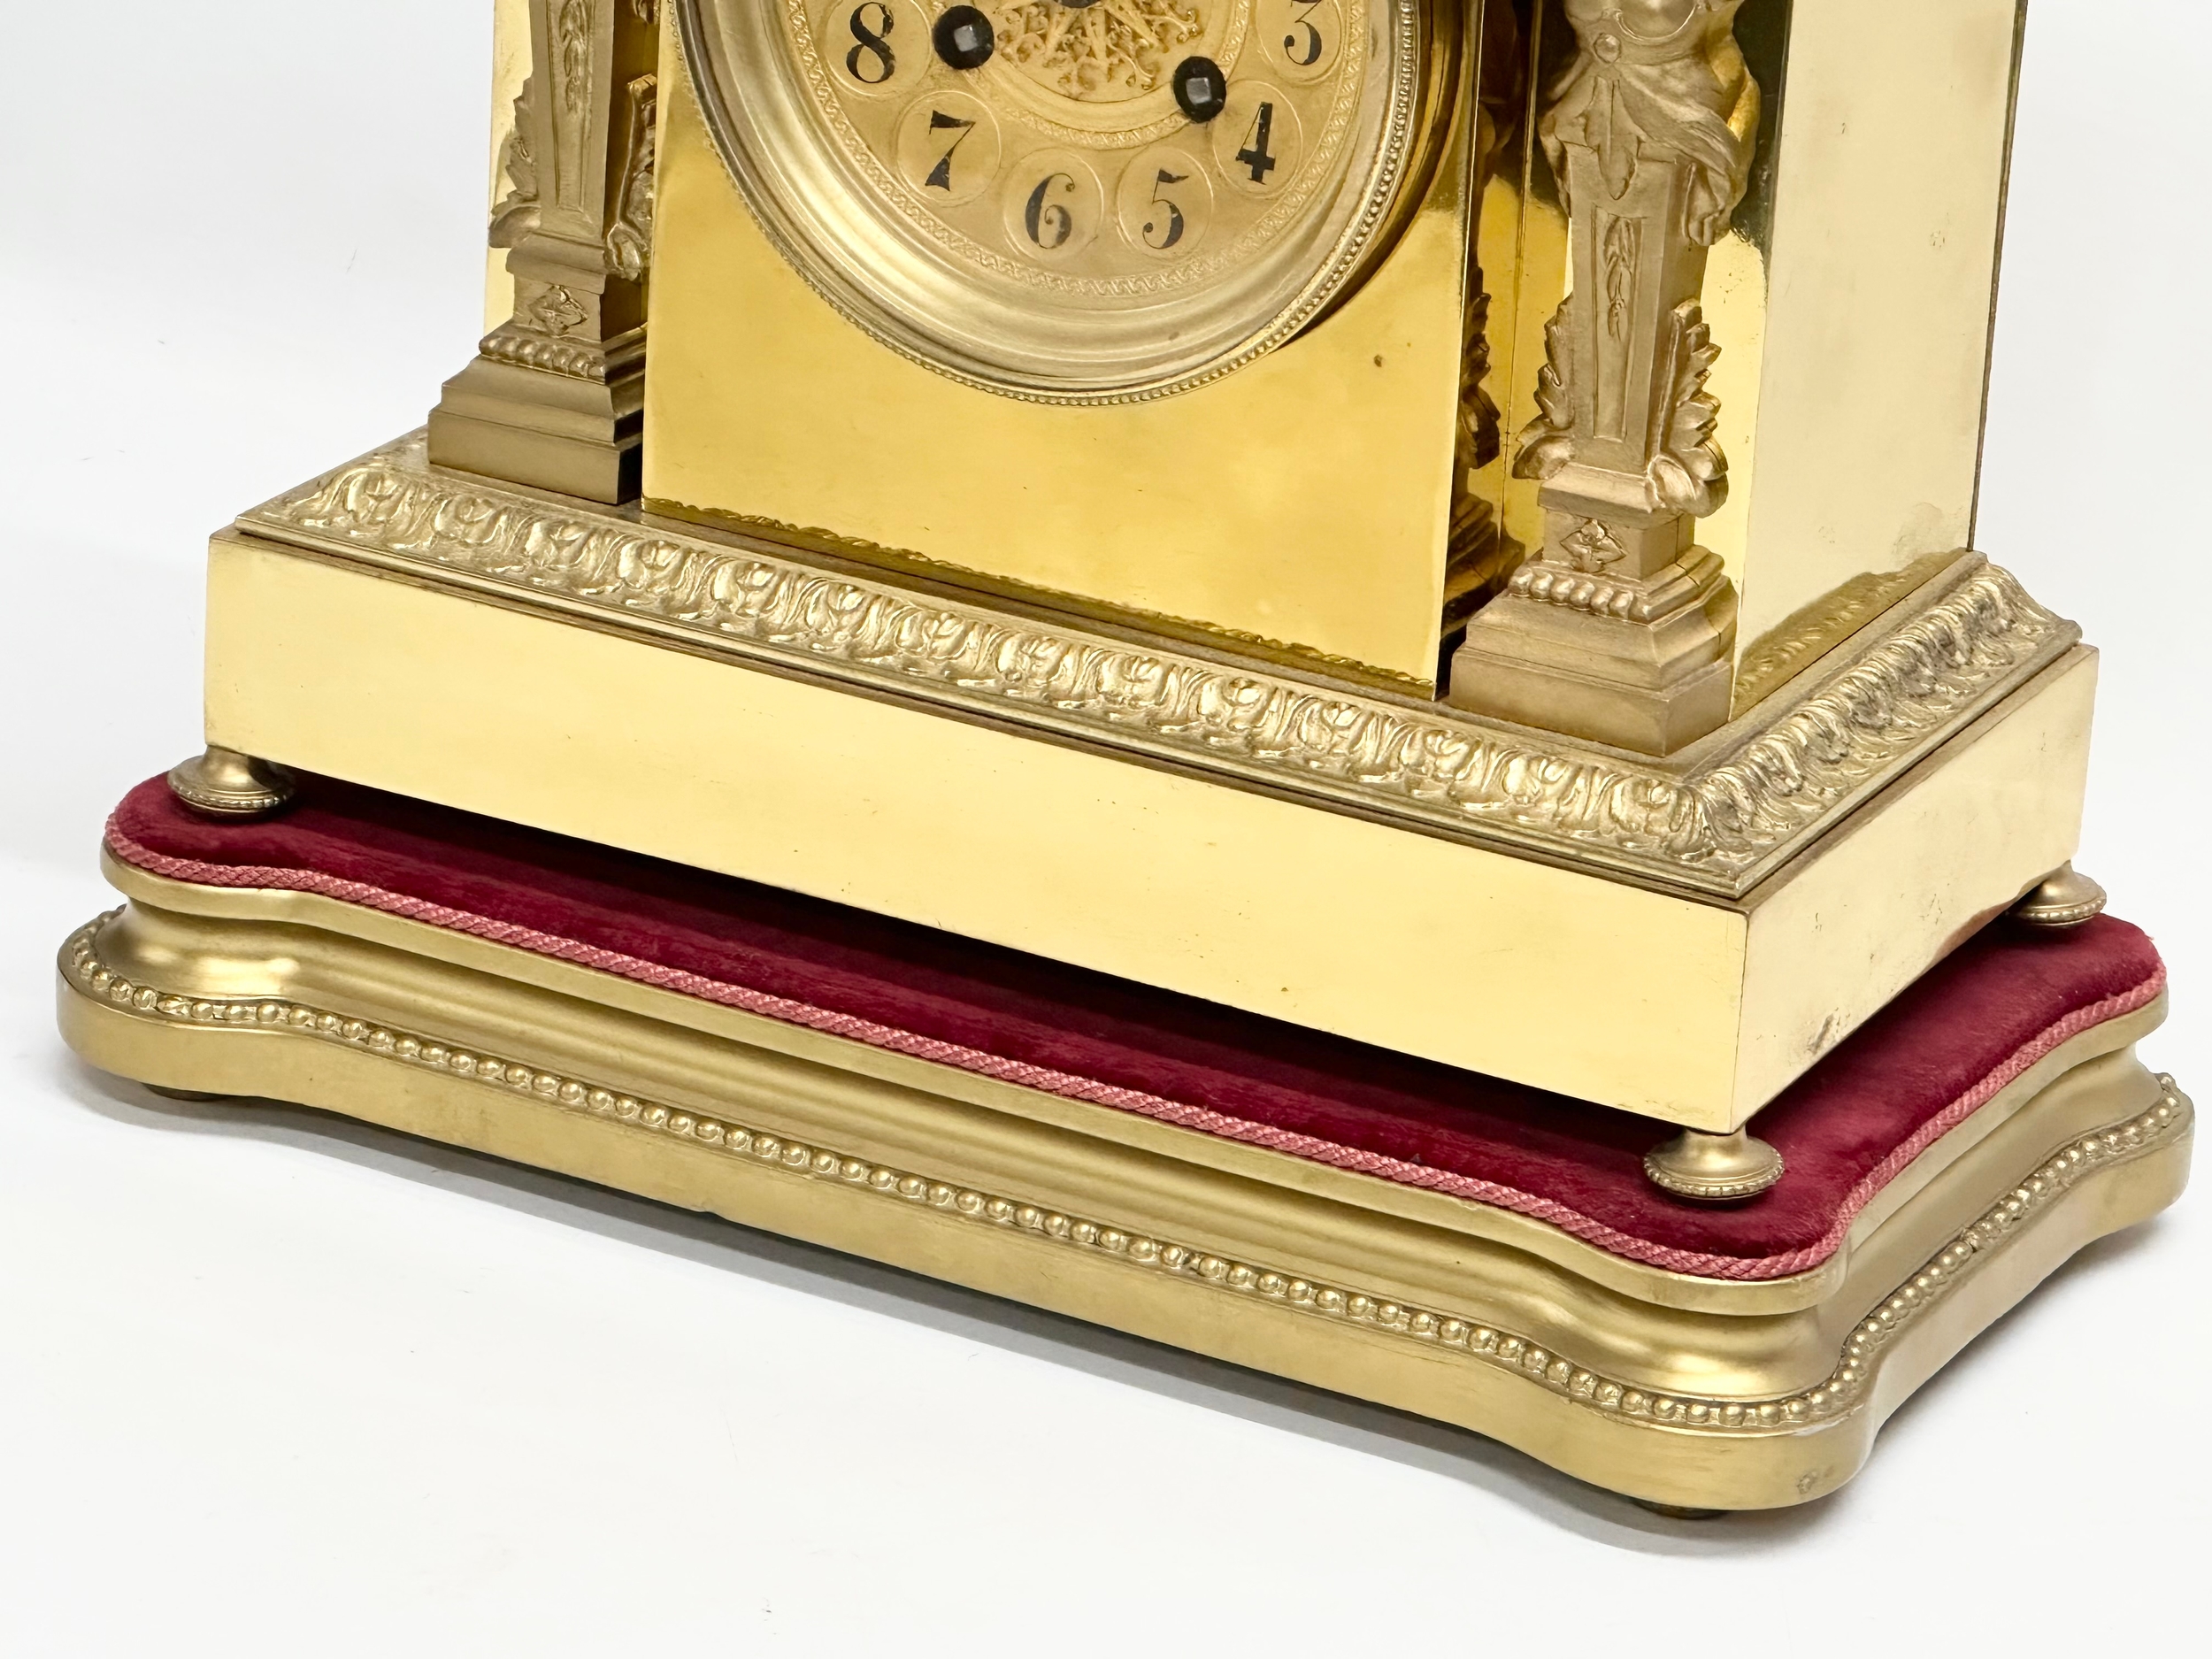 A late 19th century French brass mantle clock on stand. L. Marti Medaille D’Argent 1889. With key - Image 4 of 9